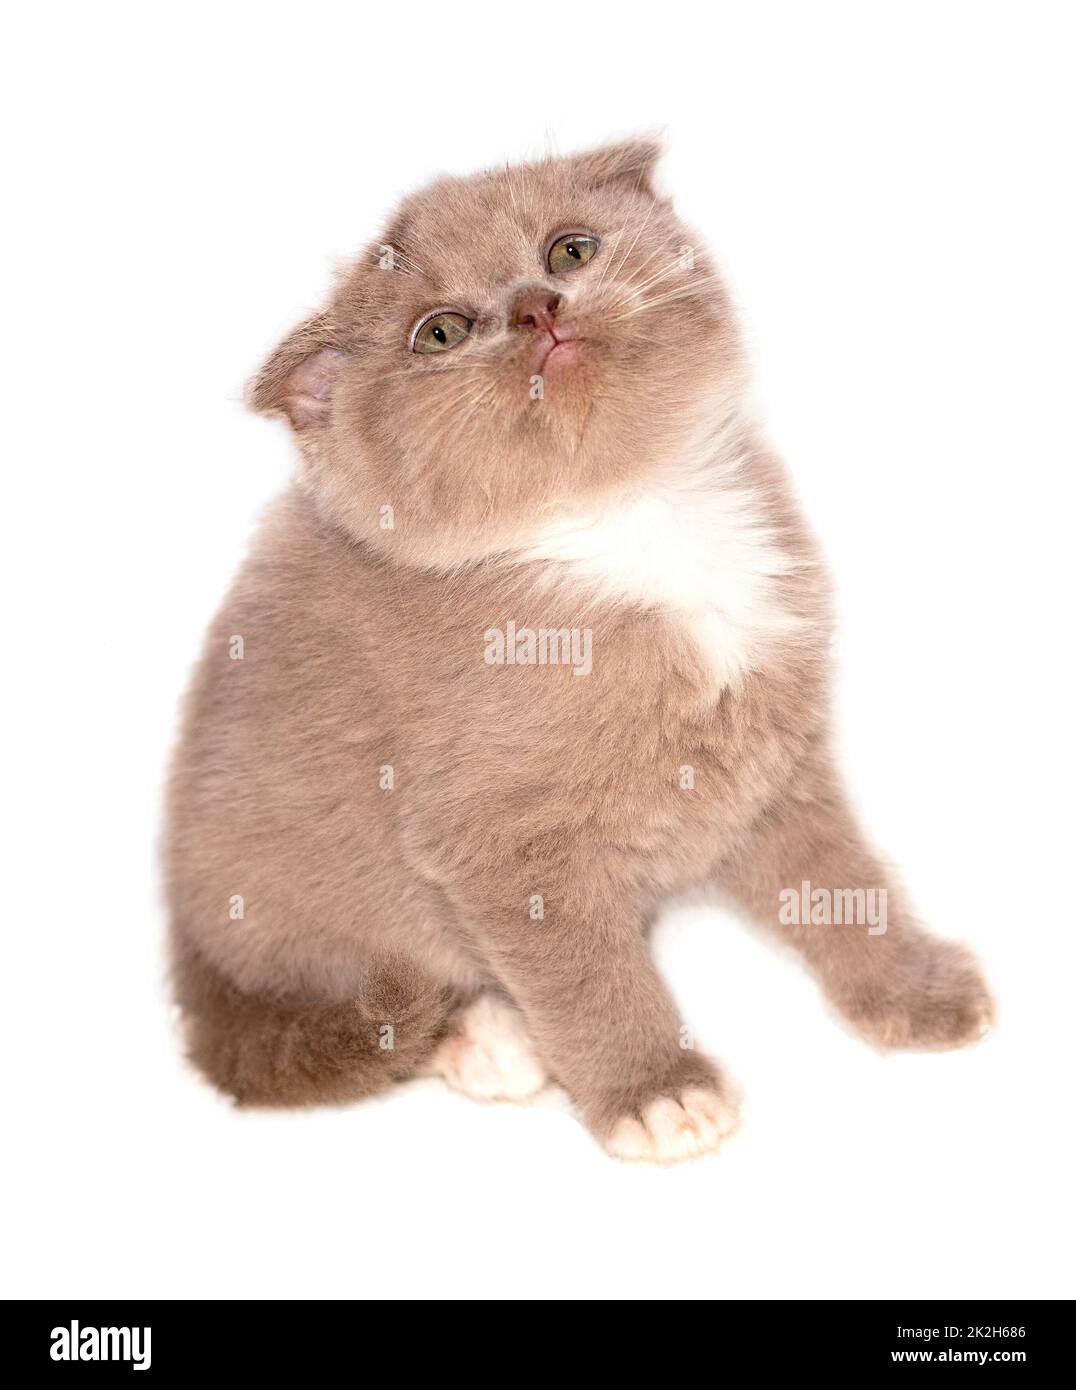 isolated image of a Scottish lilac kitten Stock Photo